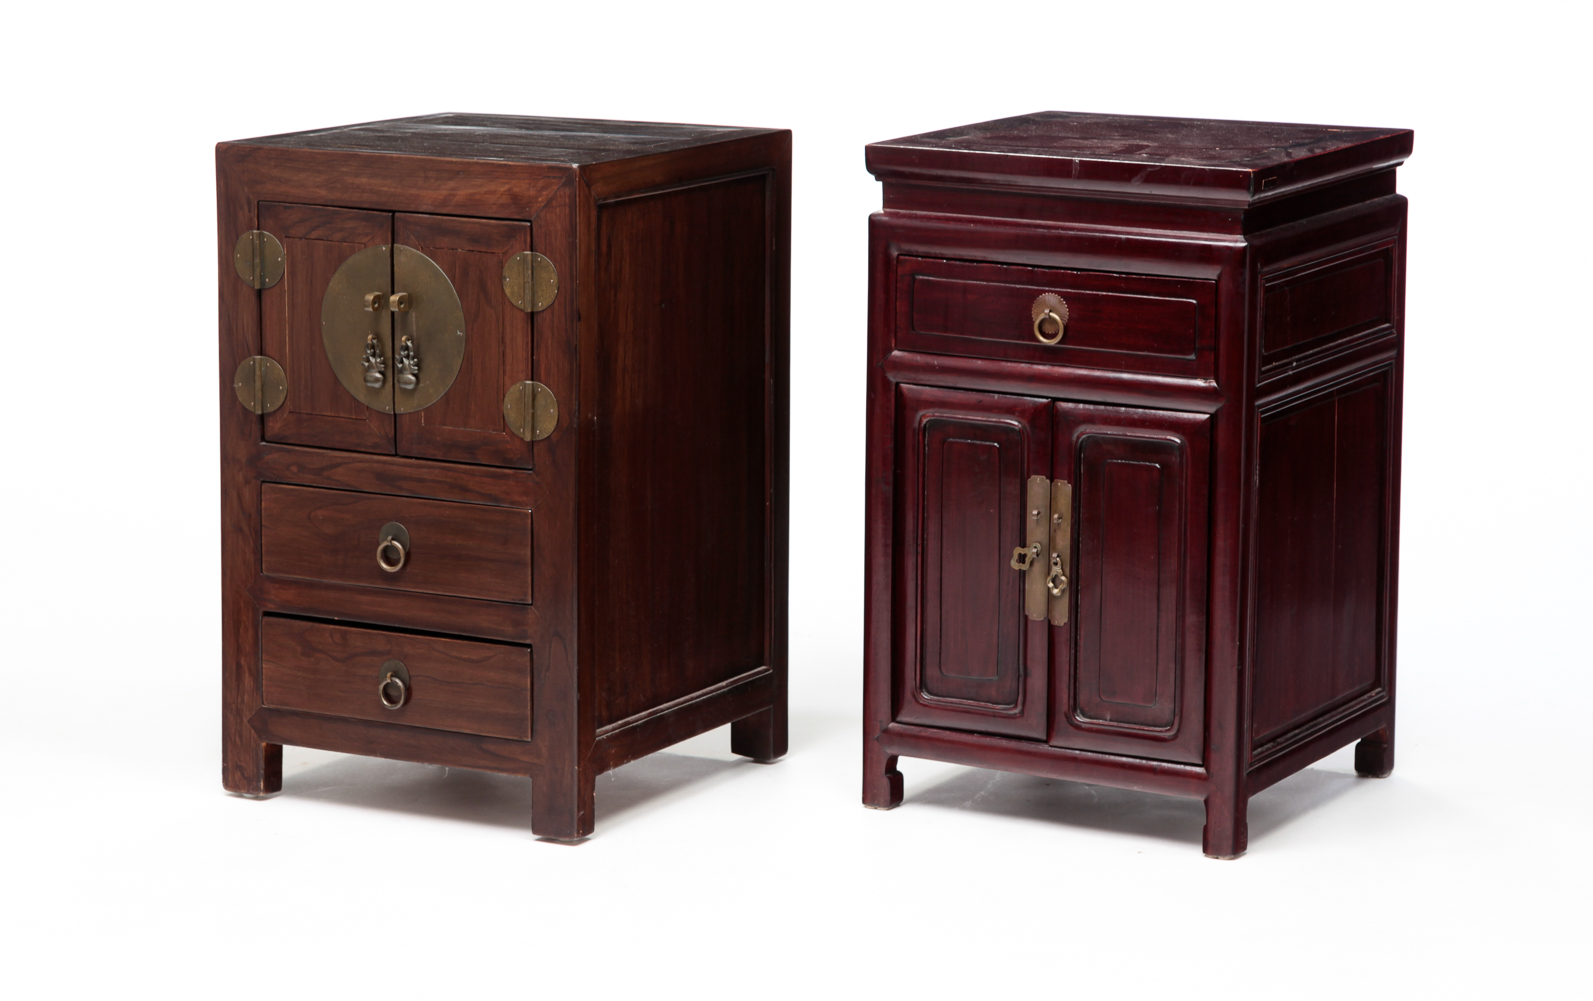 TWO CHINESE CABINETS. Late 19th-early